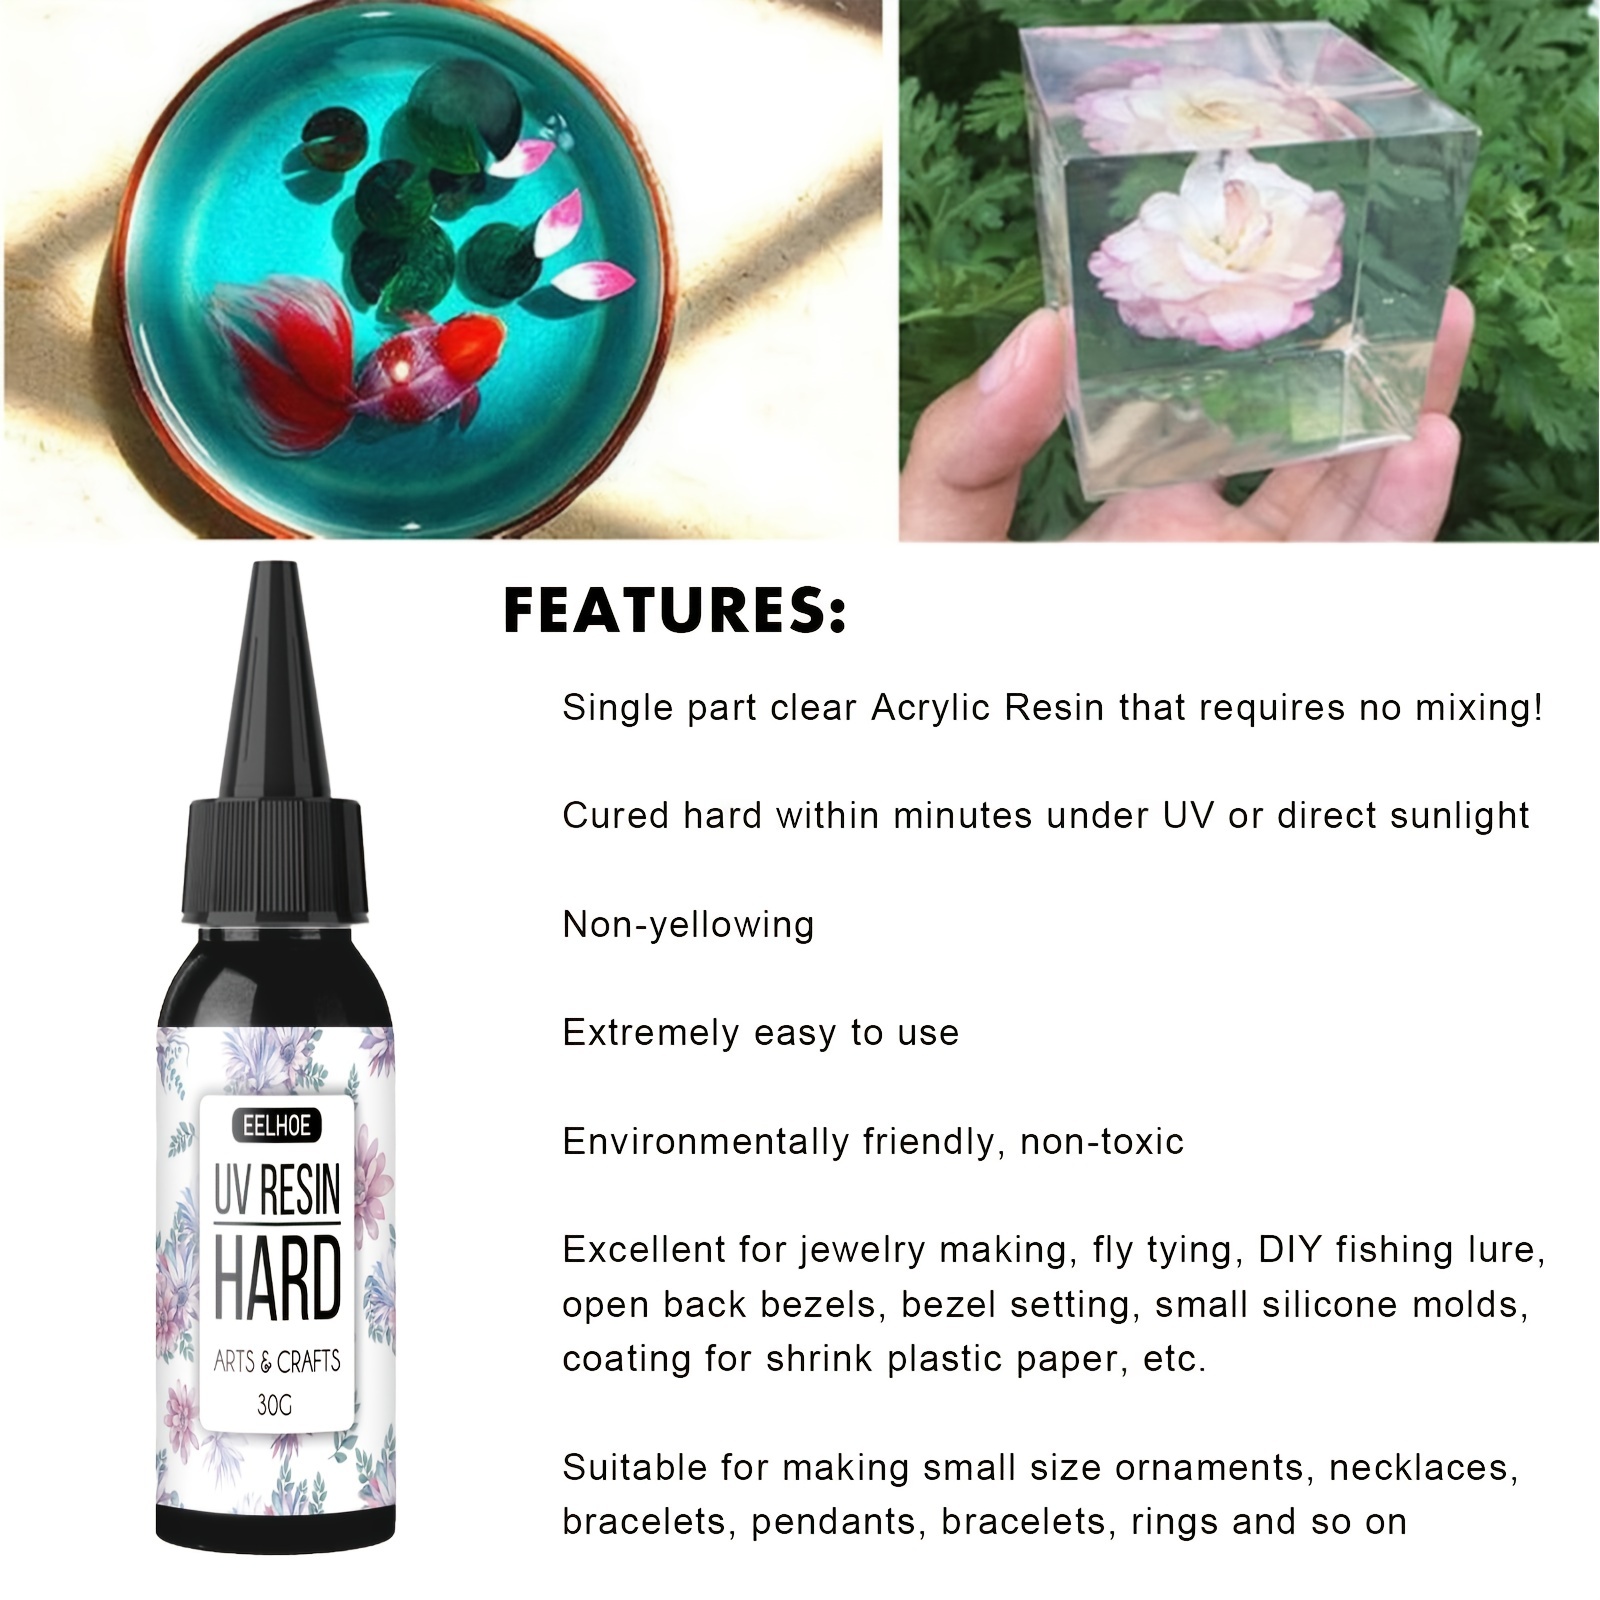 UV Resin-15 Pieces 30ml Upgrade I Minute Quick Cure! Hard Type Crystal Clear Epoxy Resin, UV Glue Ultraviolet Curing, Solar Cure Sunlight Activated